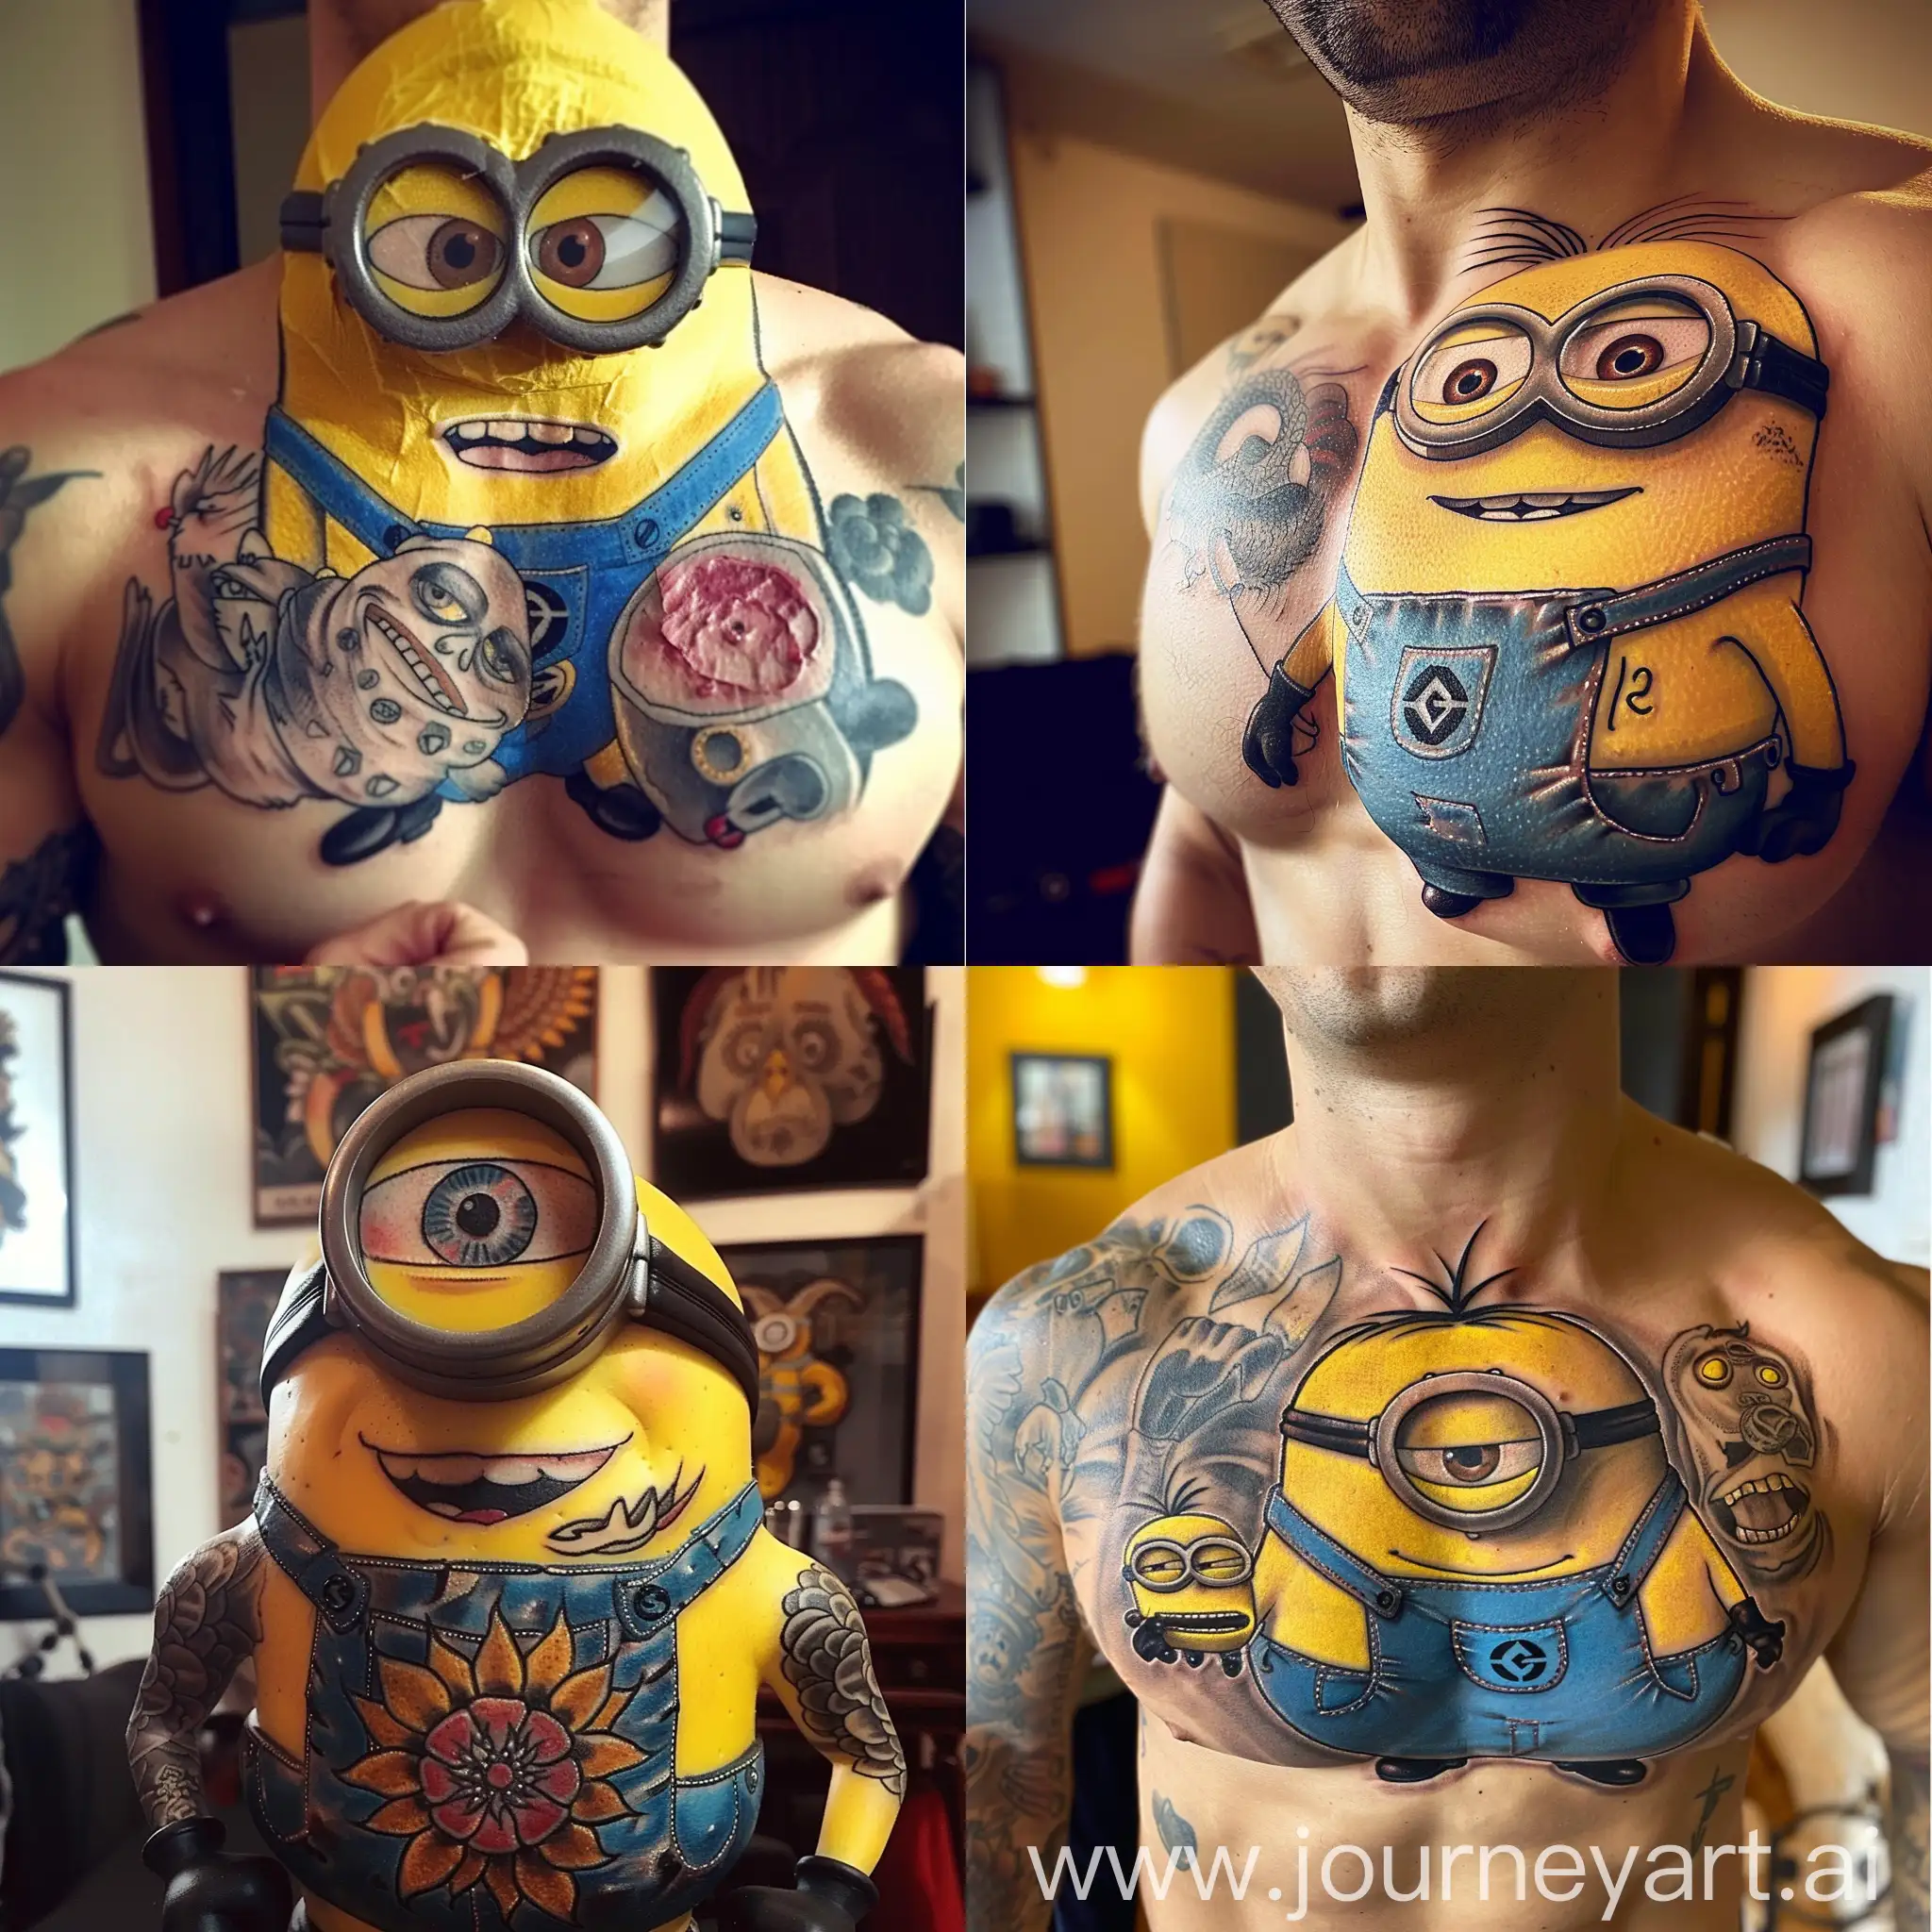 Colorful-Minion-with-Tattoo-Egor-on-Chest